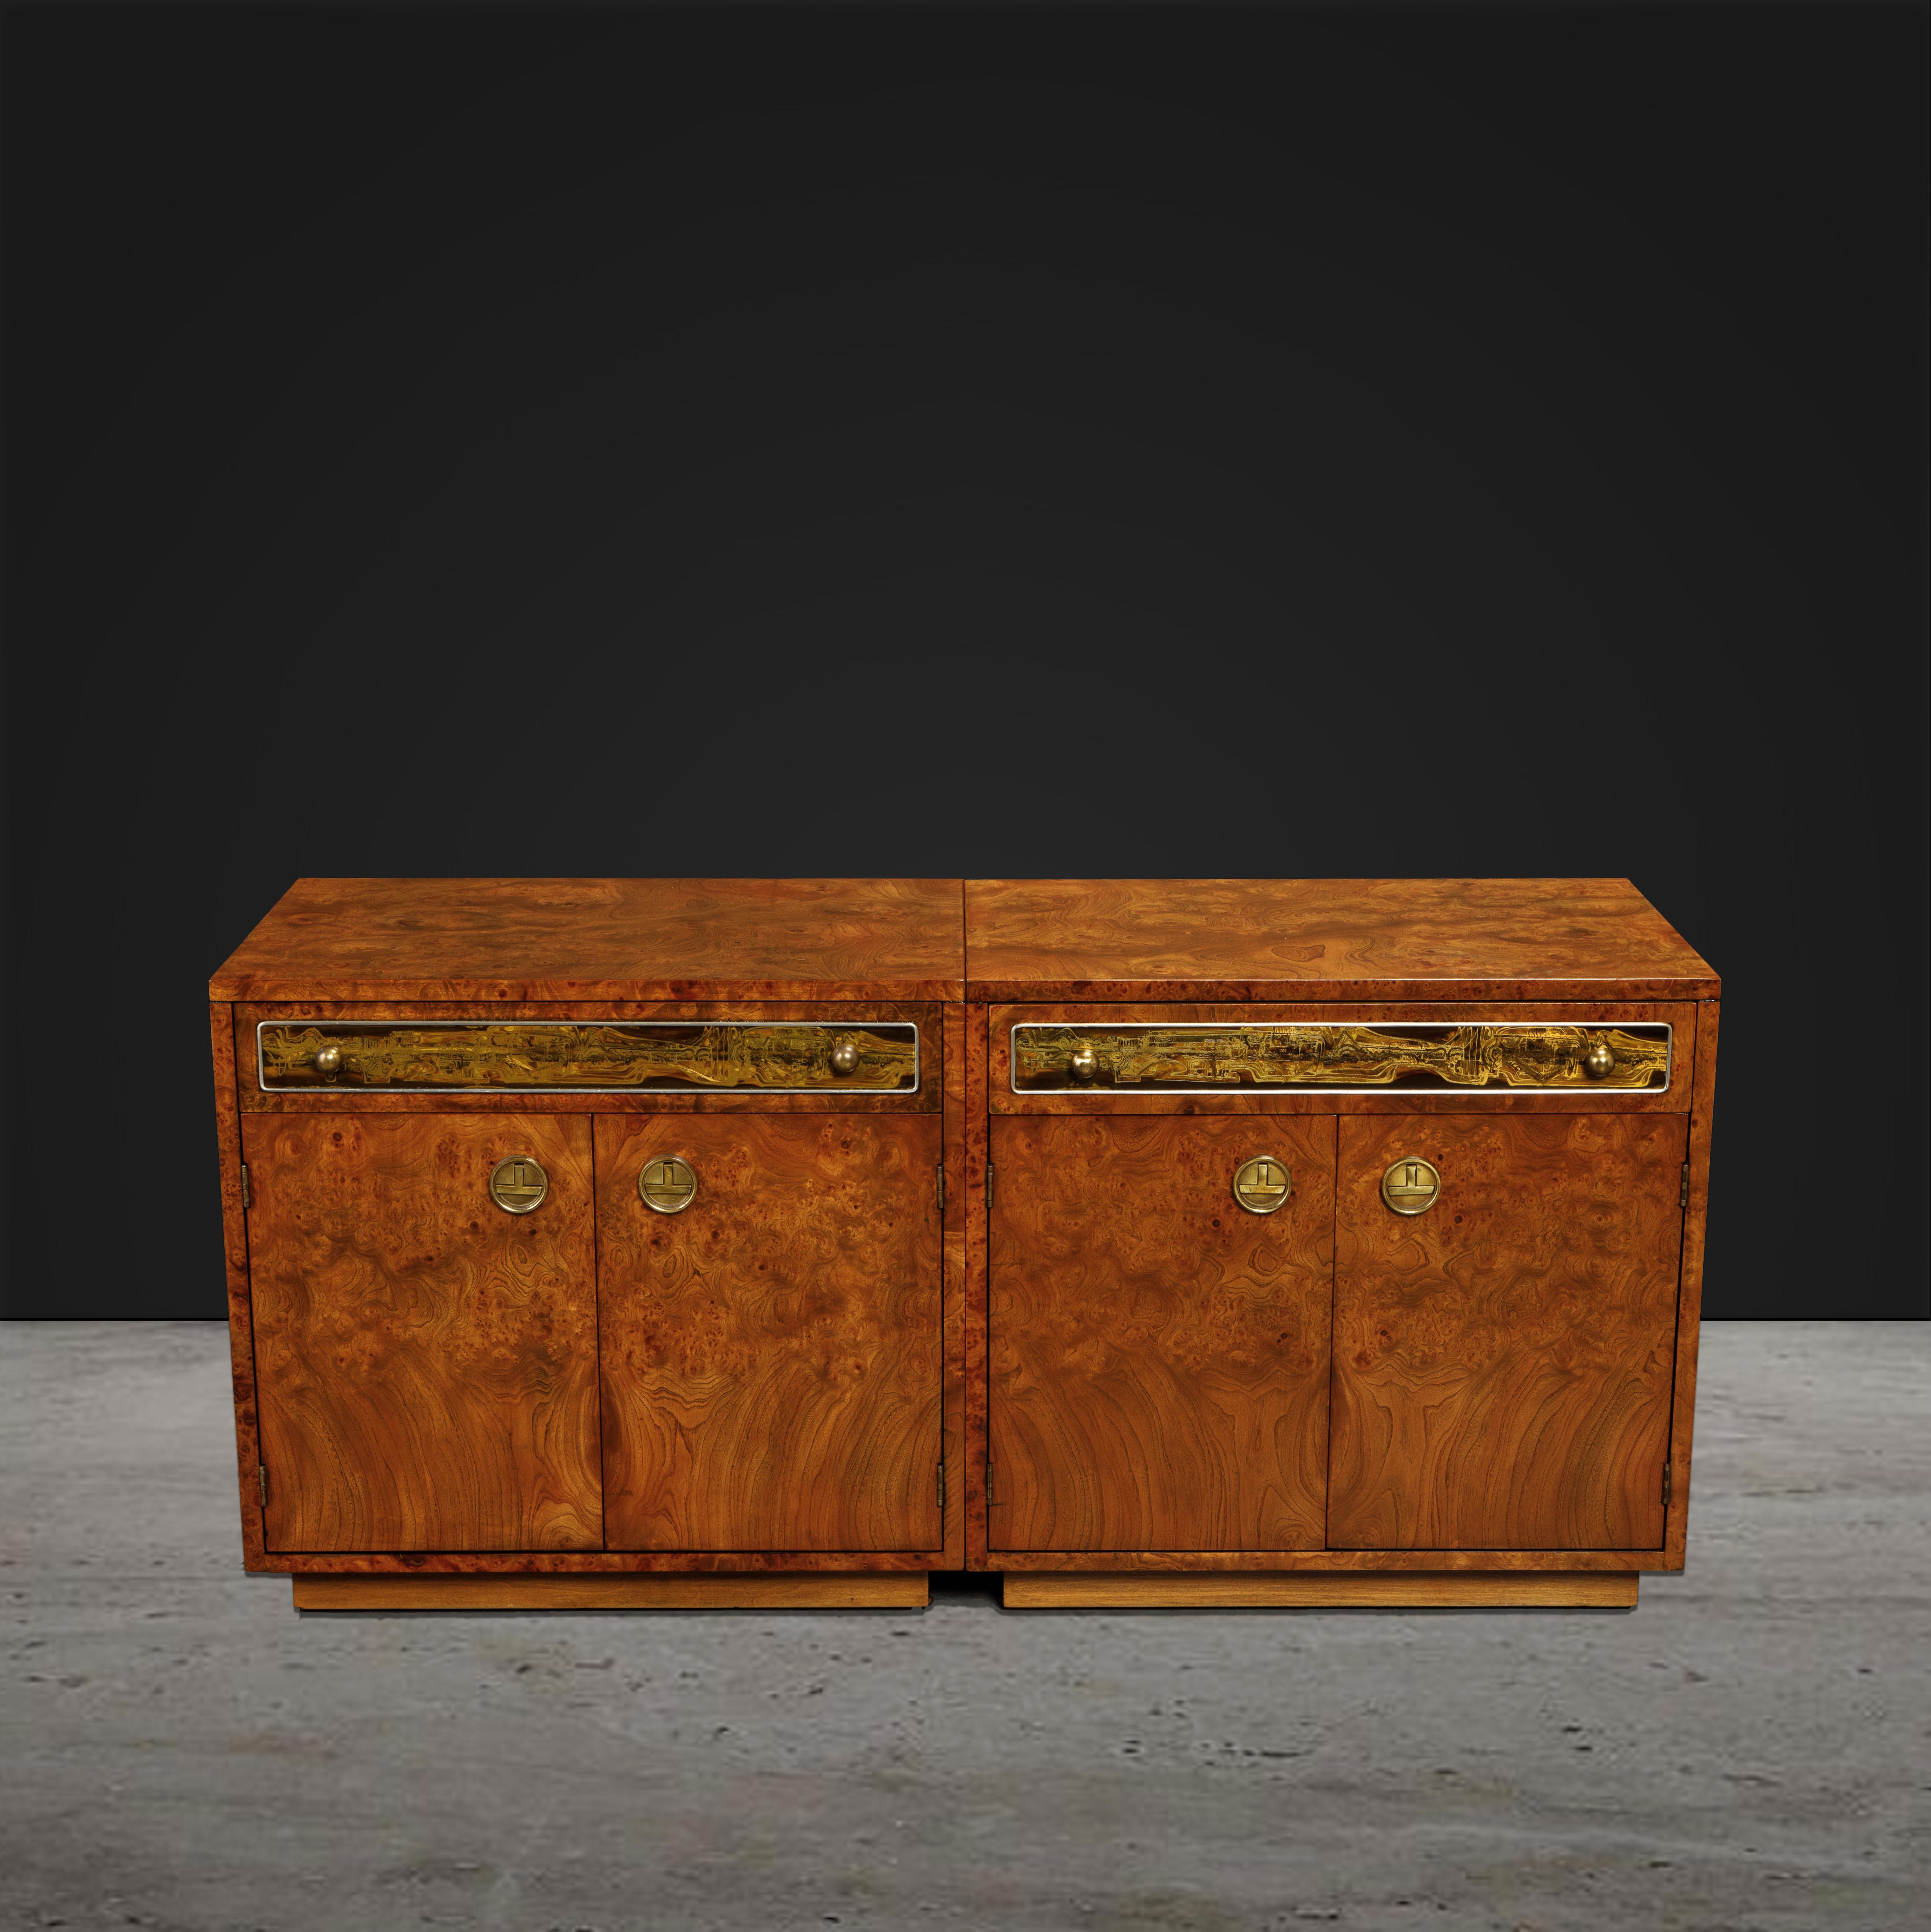 American Burl Wood and Etched Brass Nightstands by Bernhard Rohne for Mastercraft, 1970s